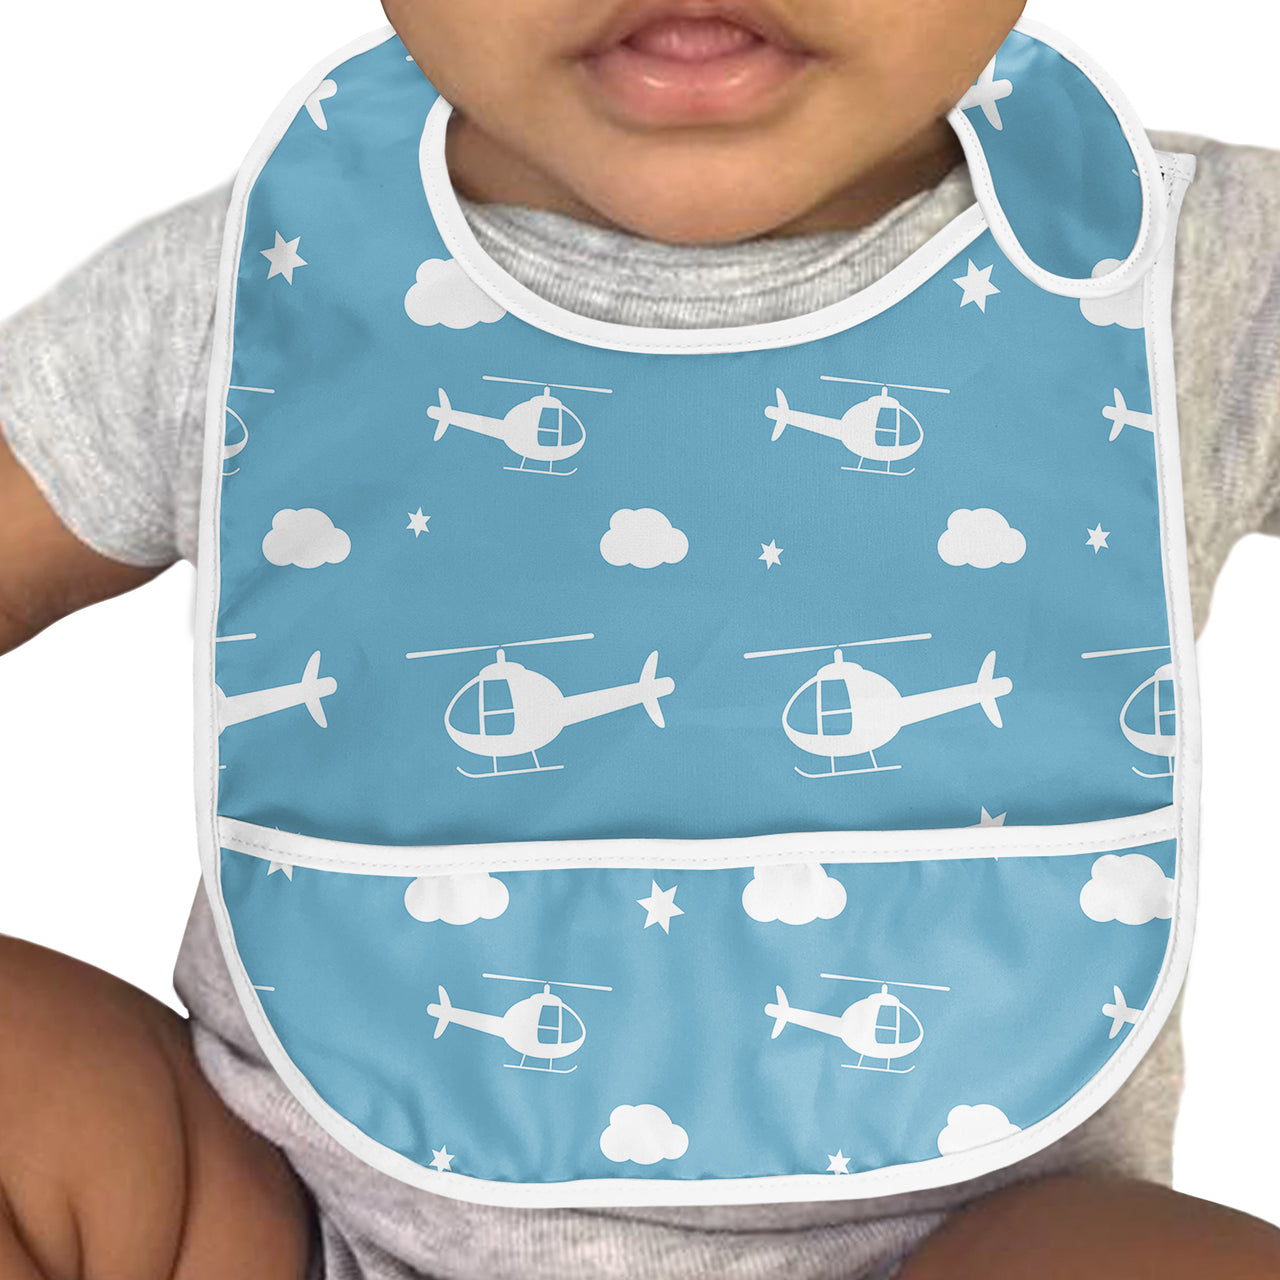 Helicopters & Clouds Designed Baby Bib